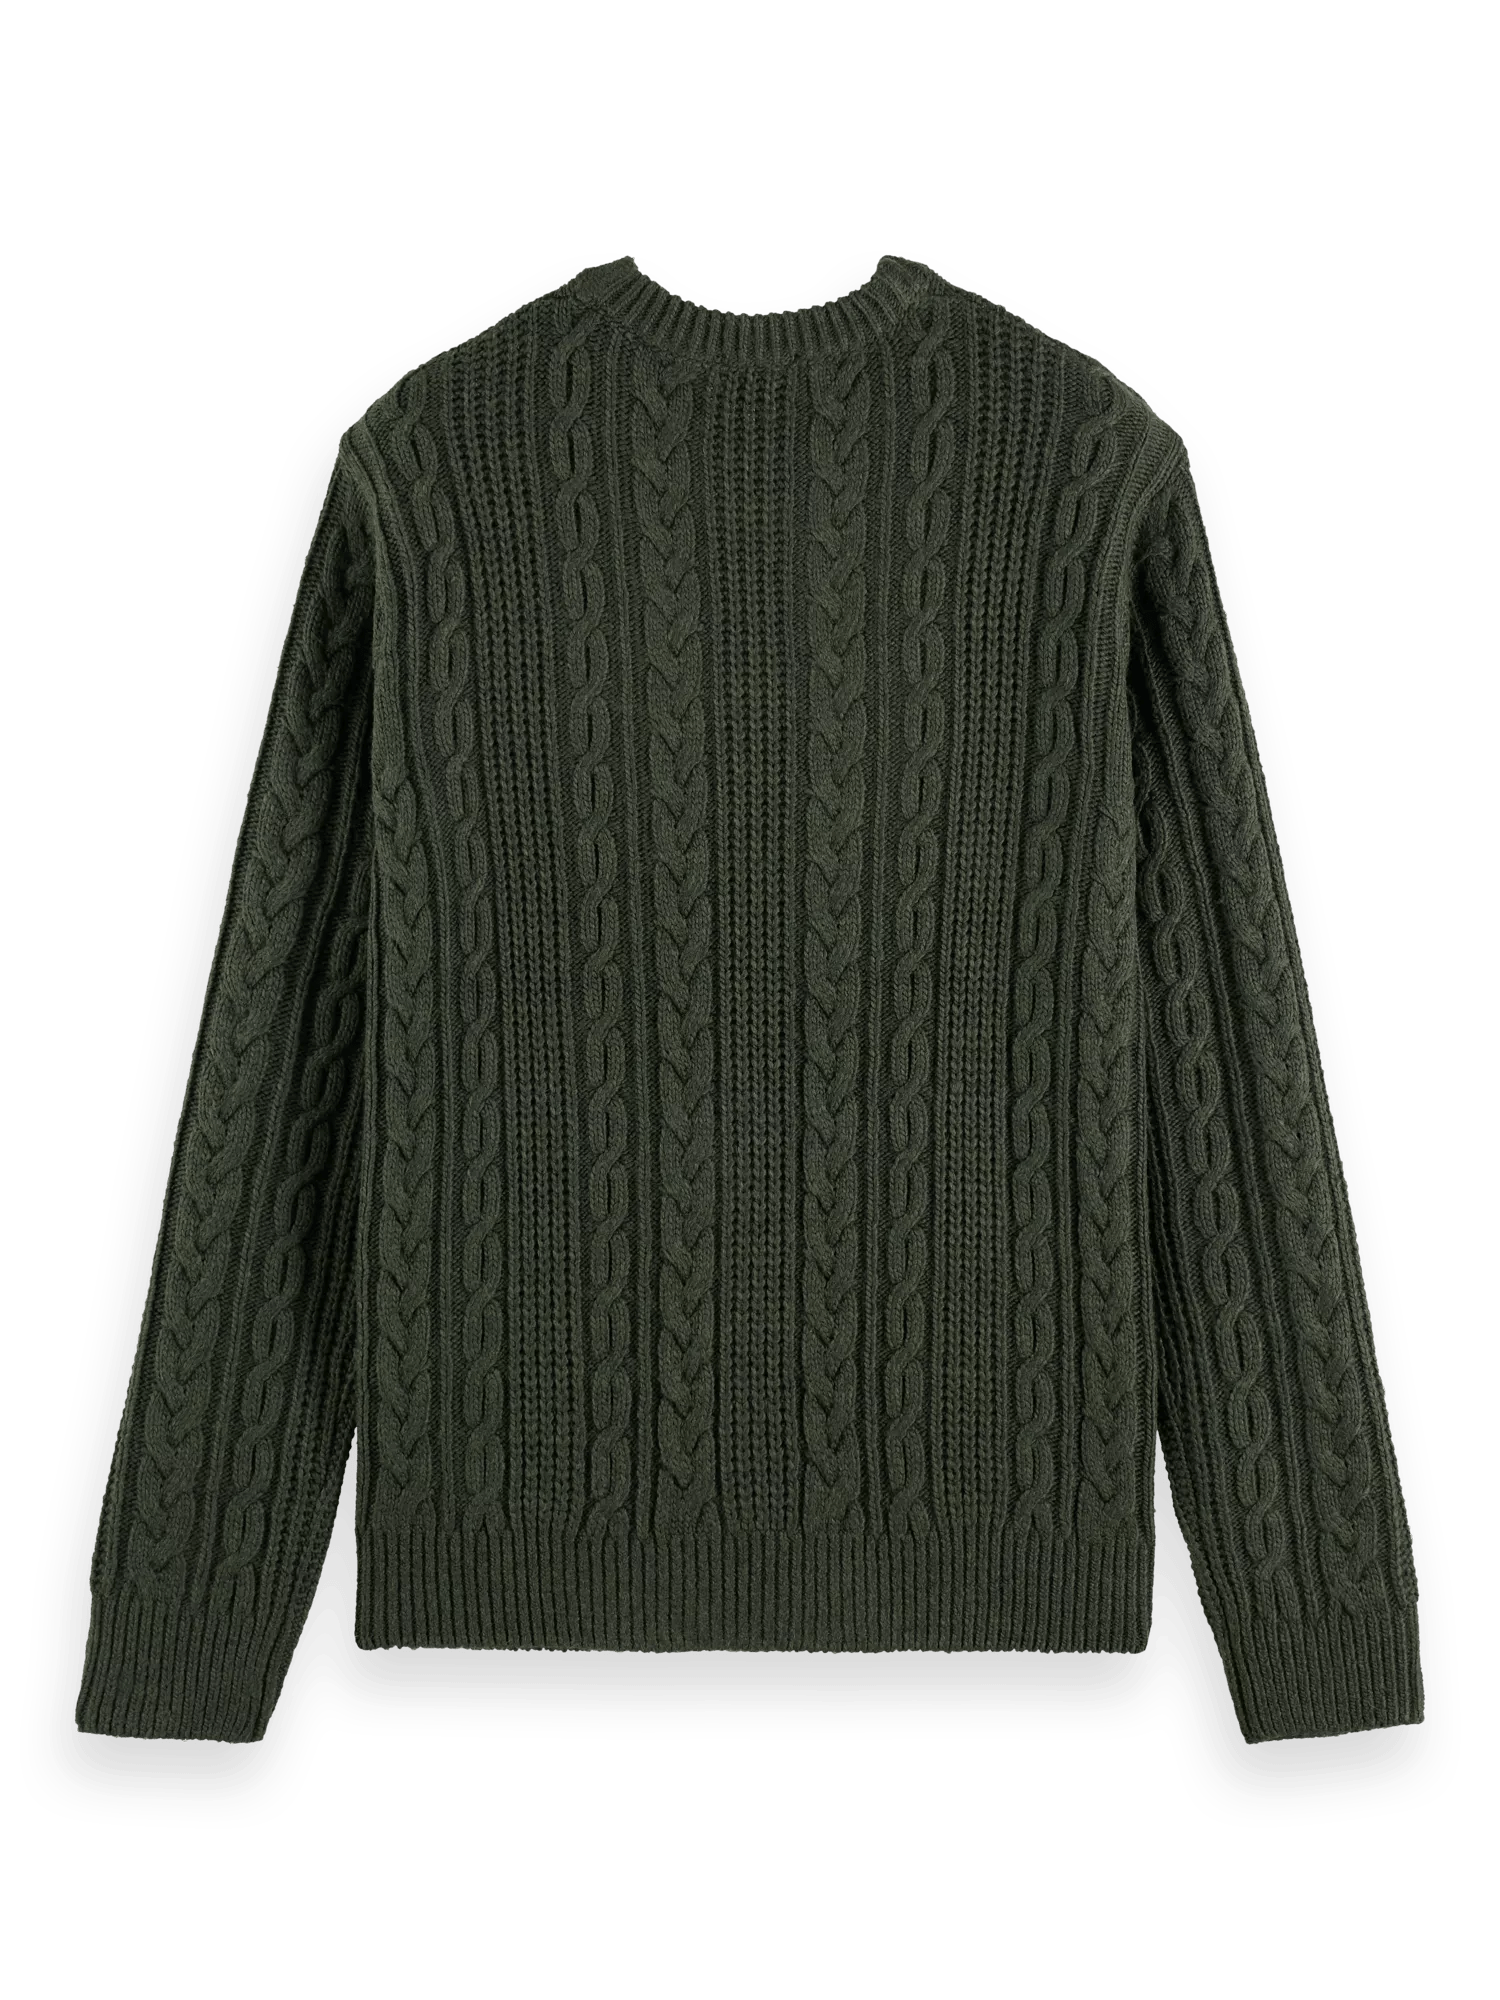 Structured knit sweater